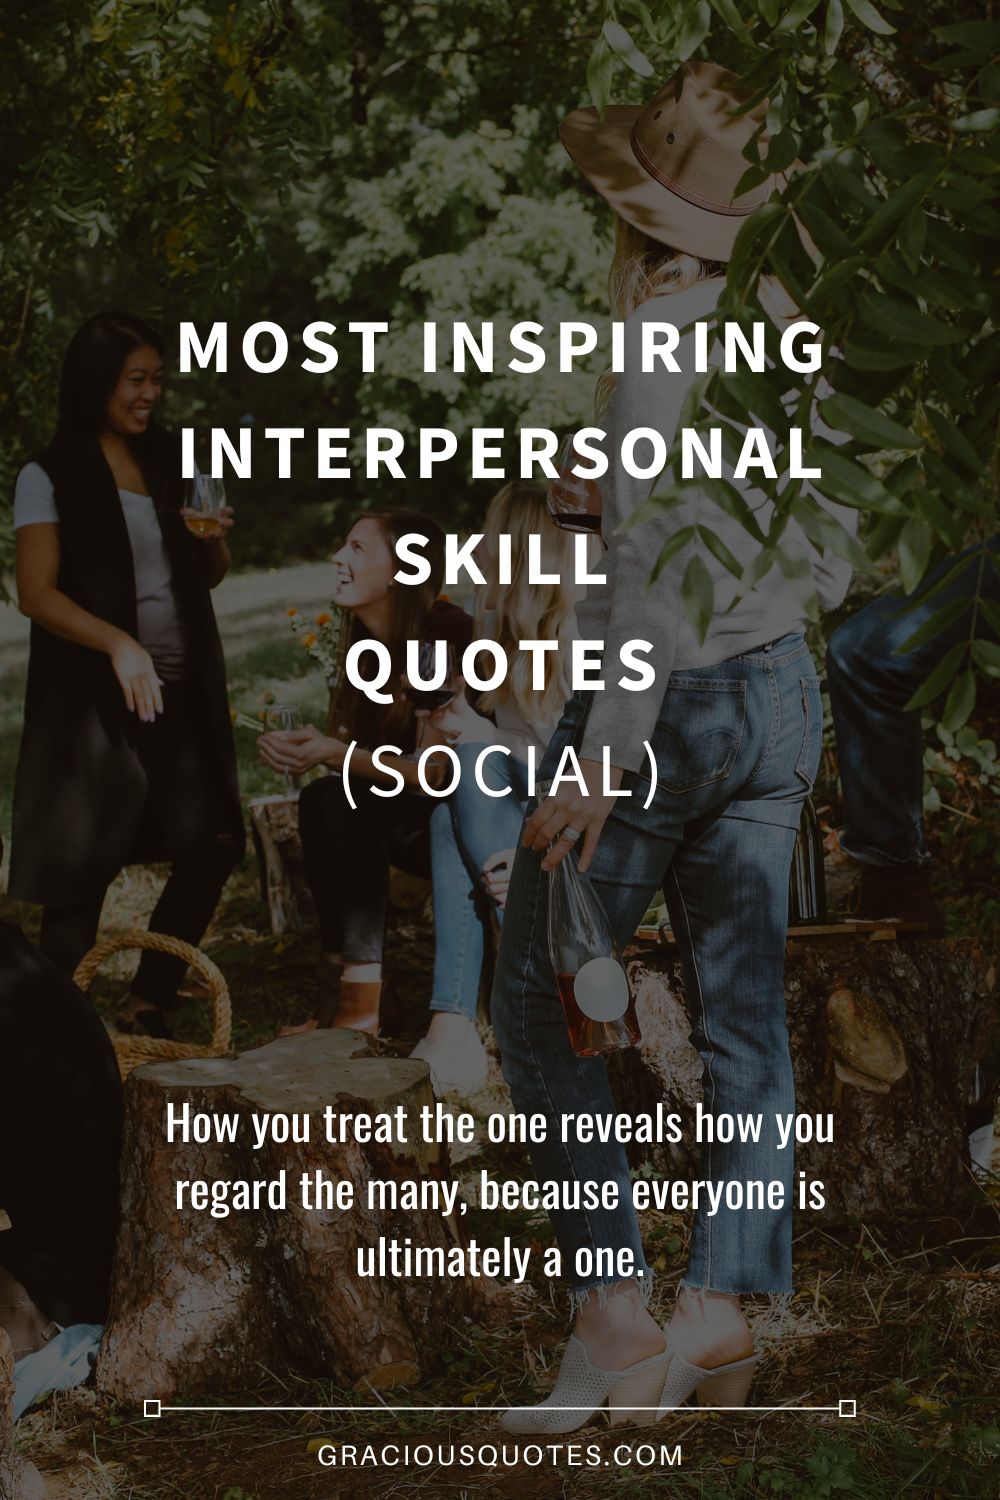 Most Inspiring Interpersonal Skill Quotes (SOCIAL) - Gracious Quotes